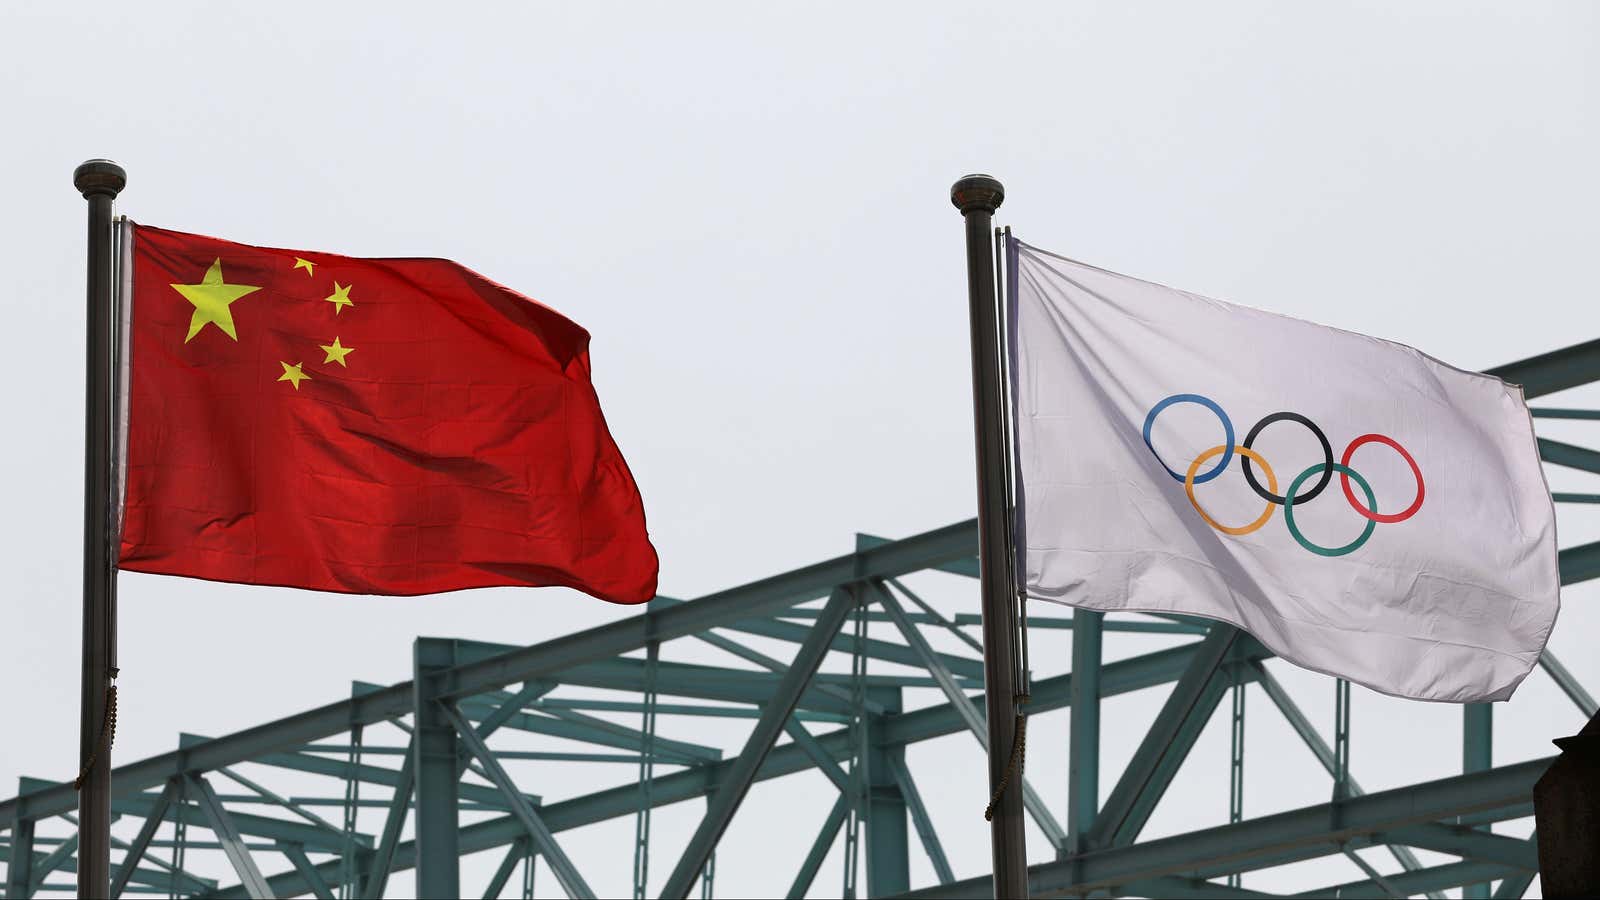 The debate over a possible boycott of the Beijing Winter Olympics is heating up.